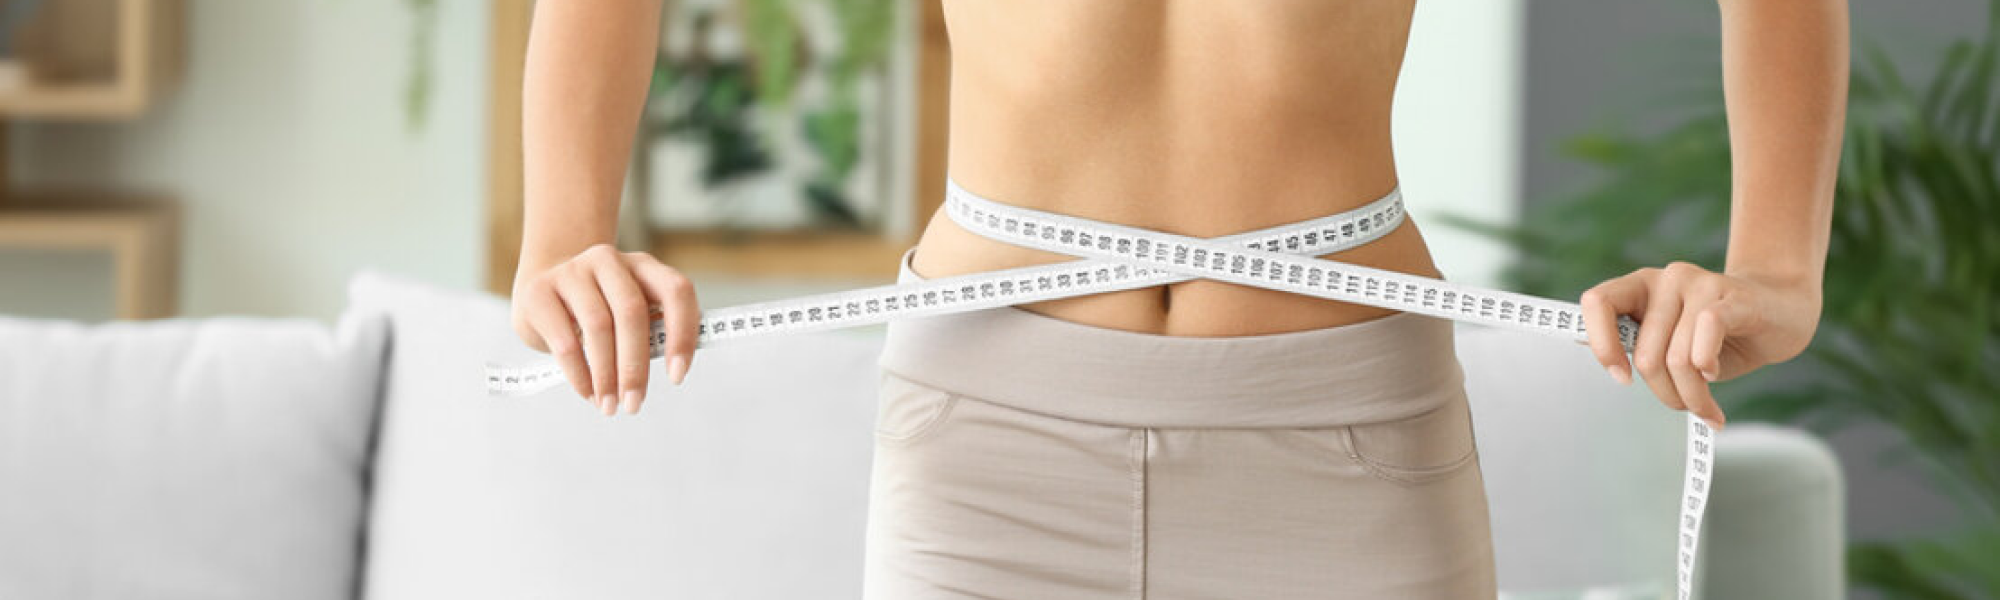 Achieve Your Goals: Discover Our Weight Loss Solutions! 